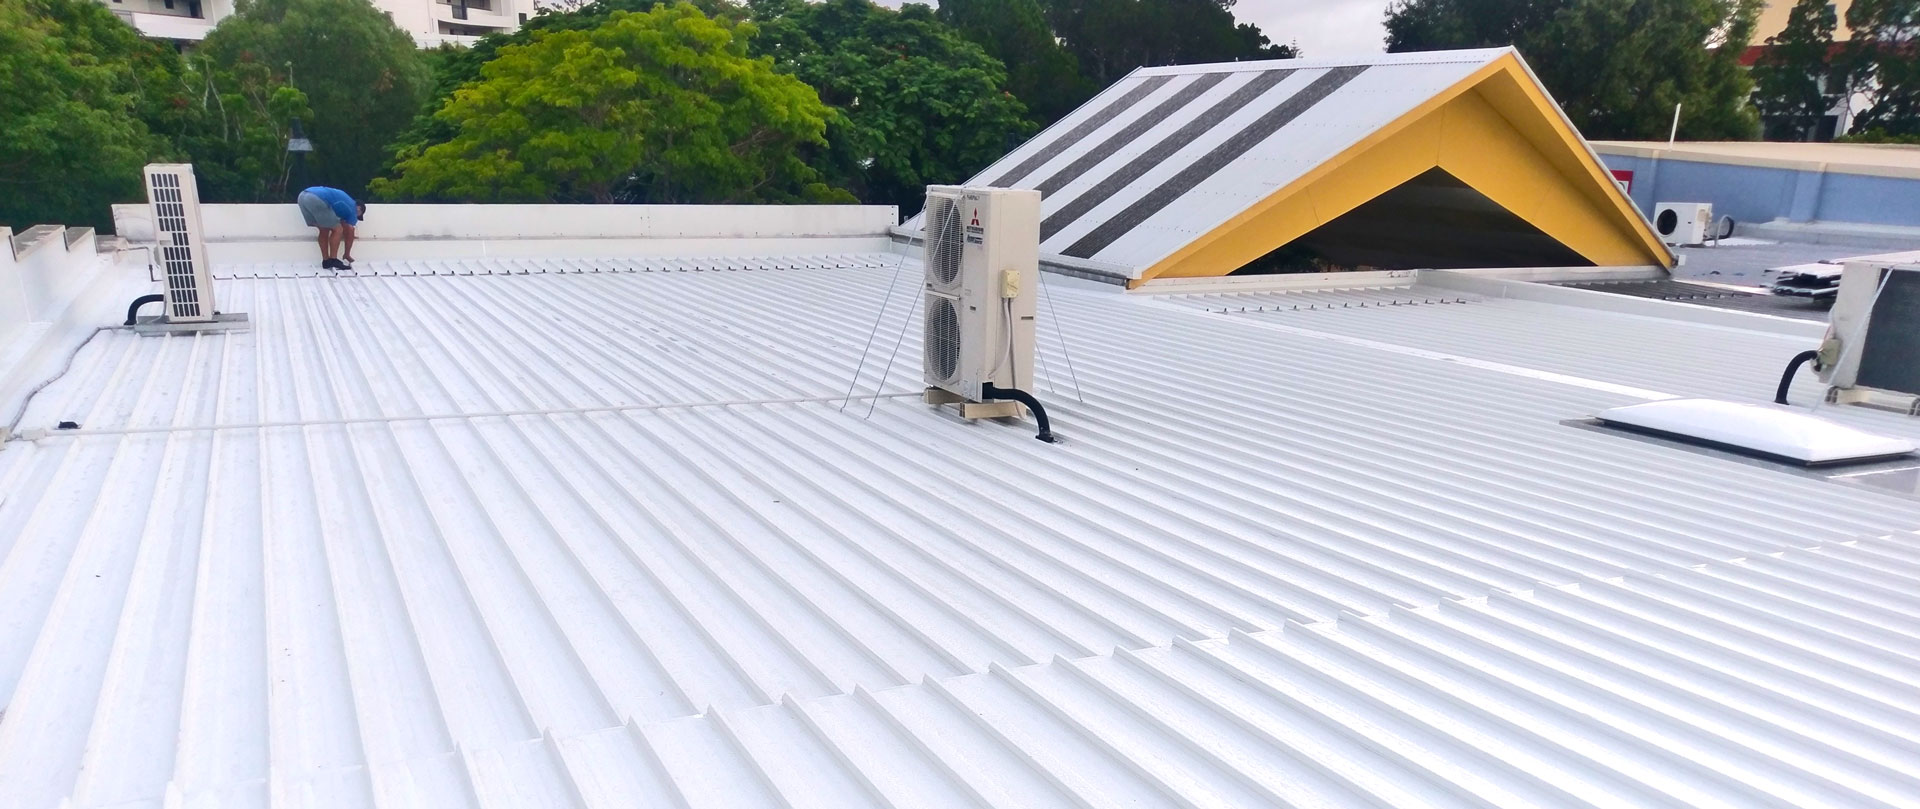 Golden Beach Shops Roof Replacement - Roofing Projects